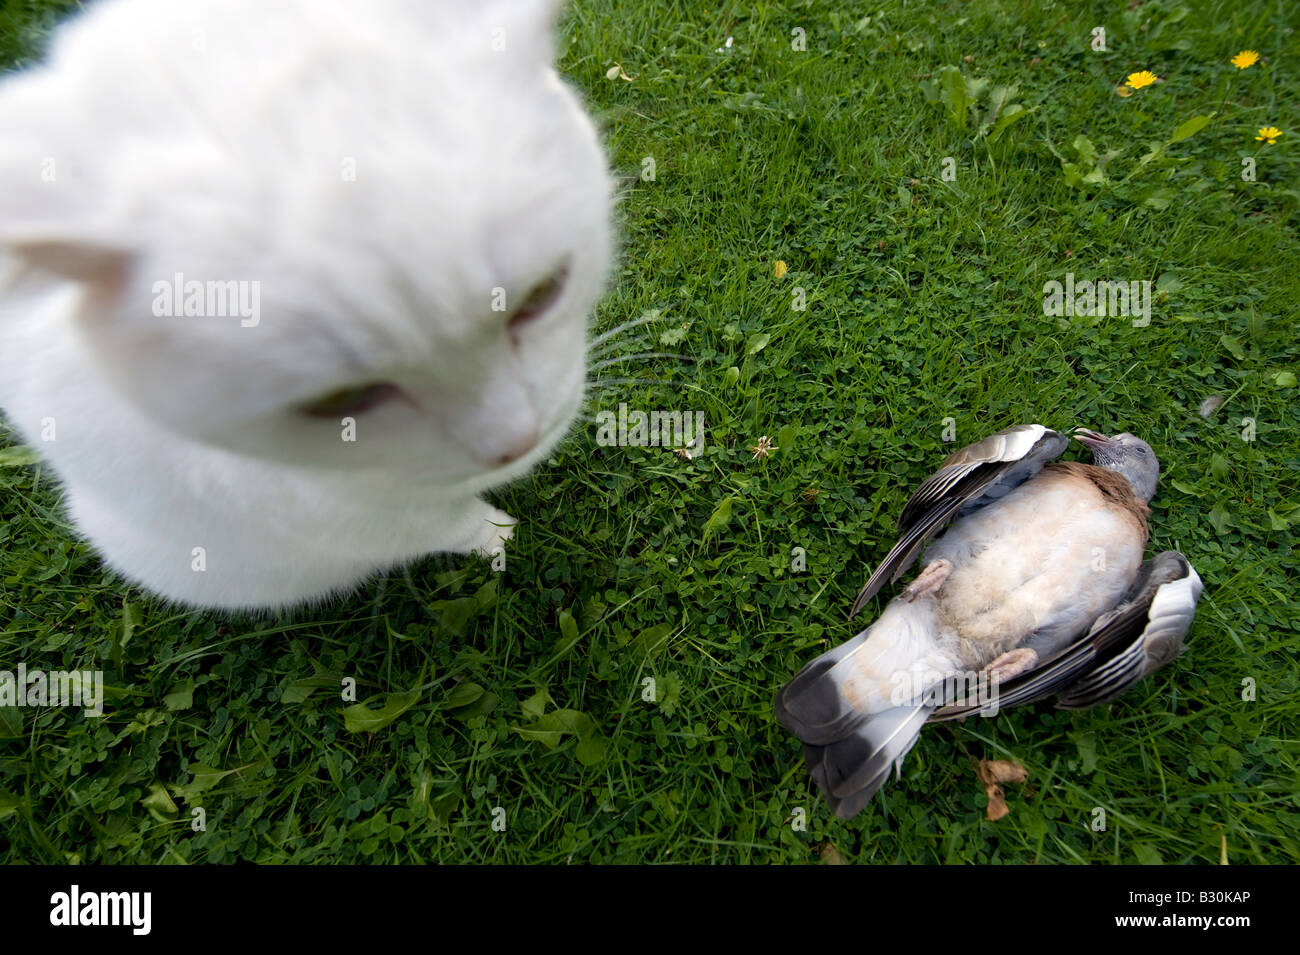 The cat looks pleased after killing a pigeon. Stock Photo